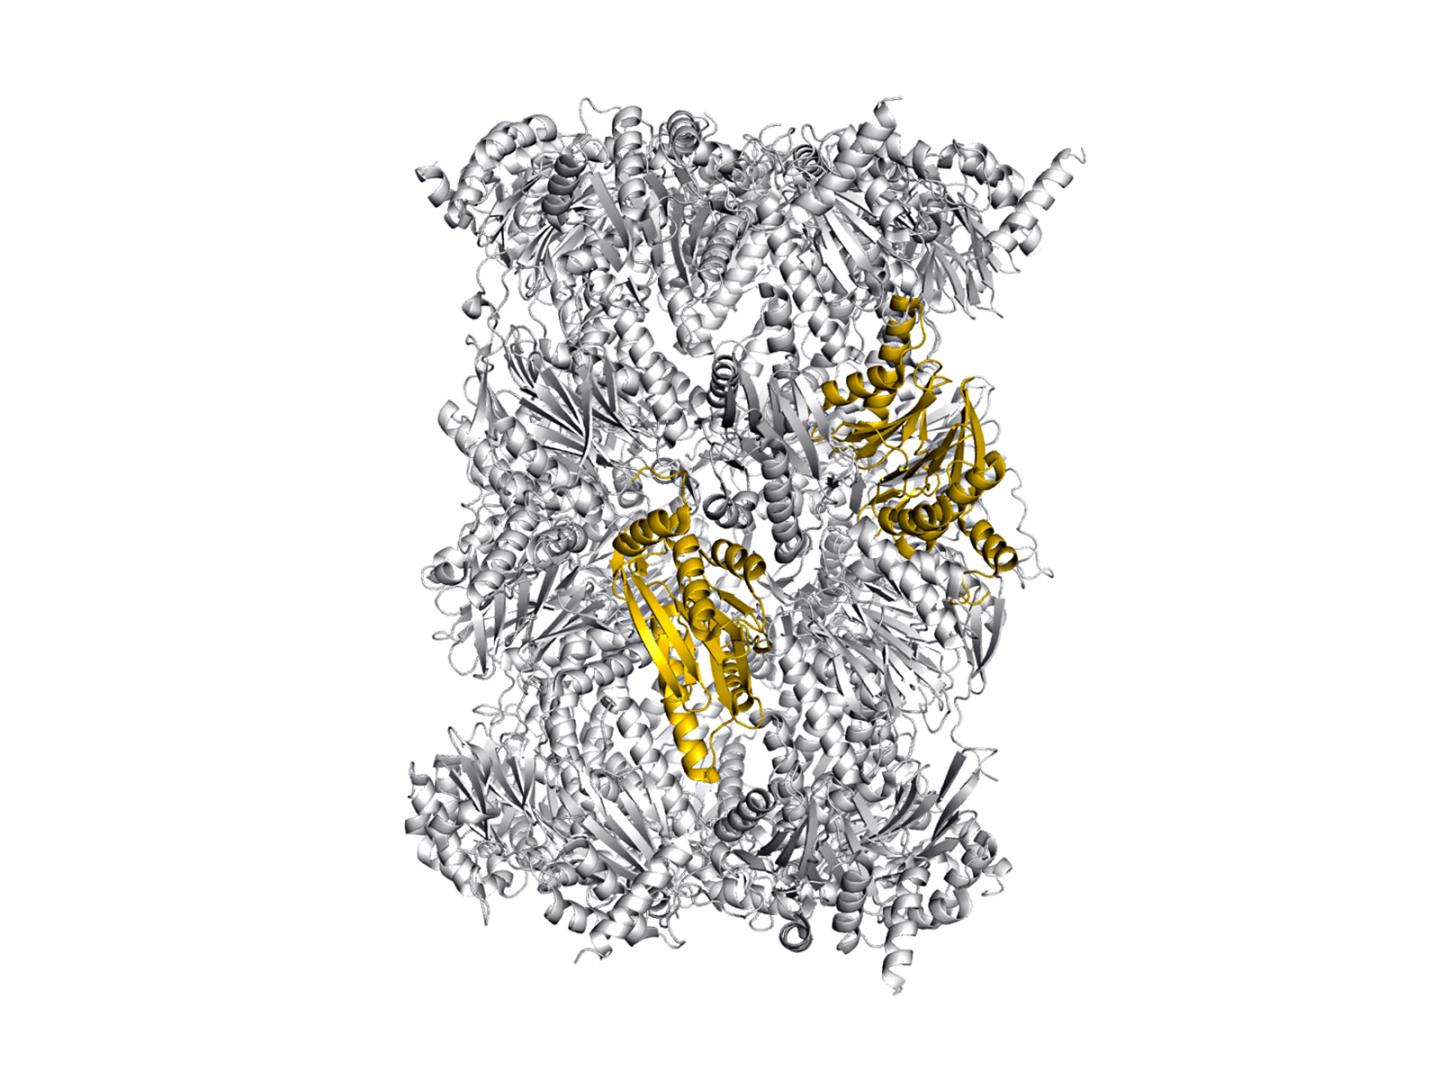 Structure of the Immunoproteasome